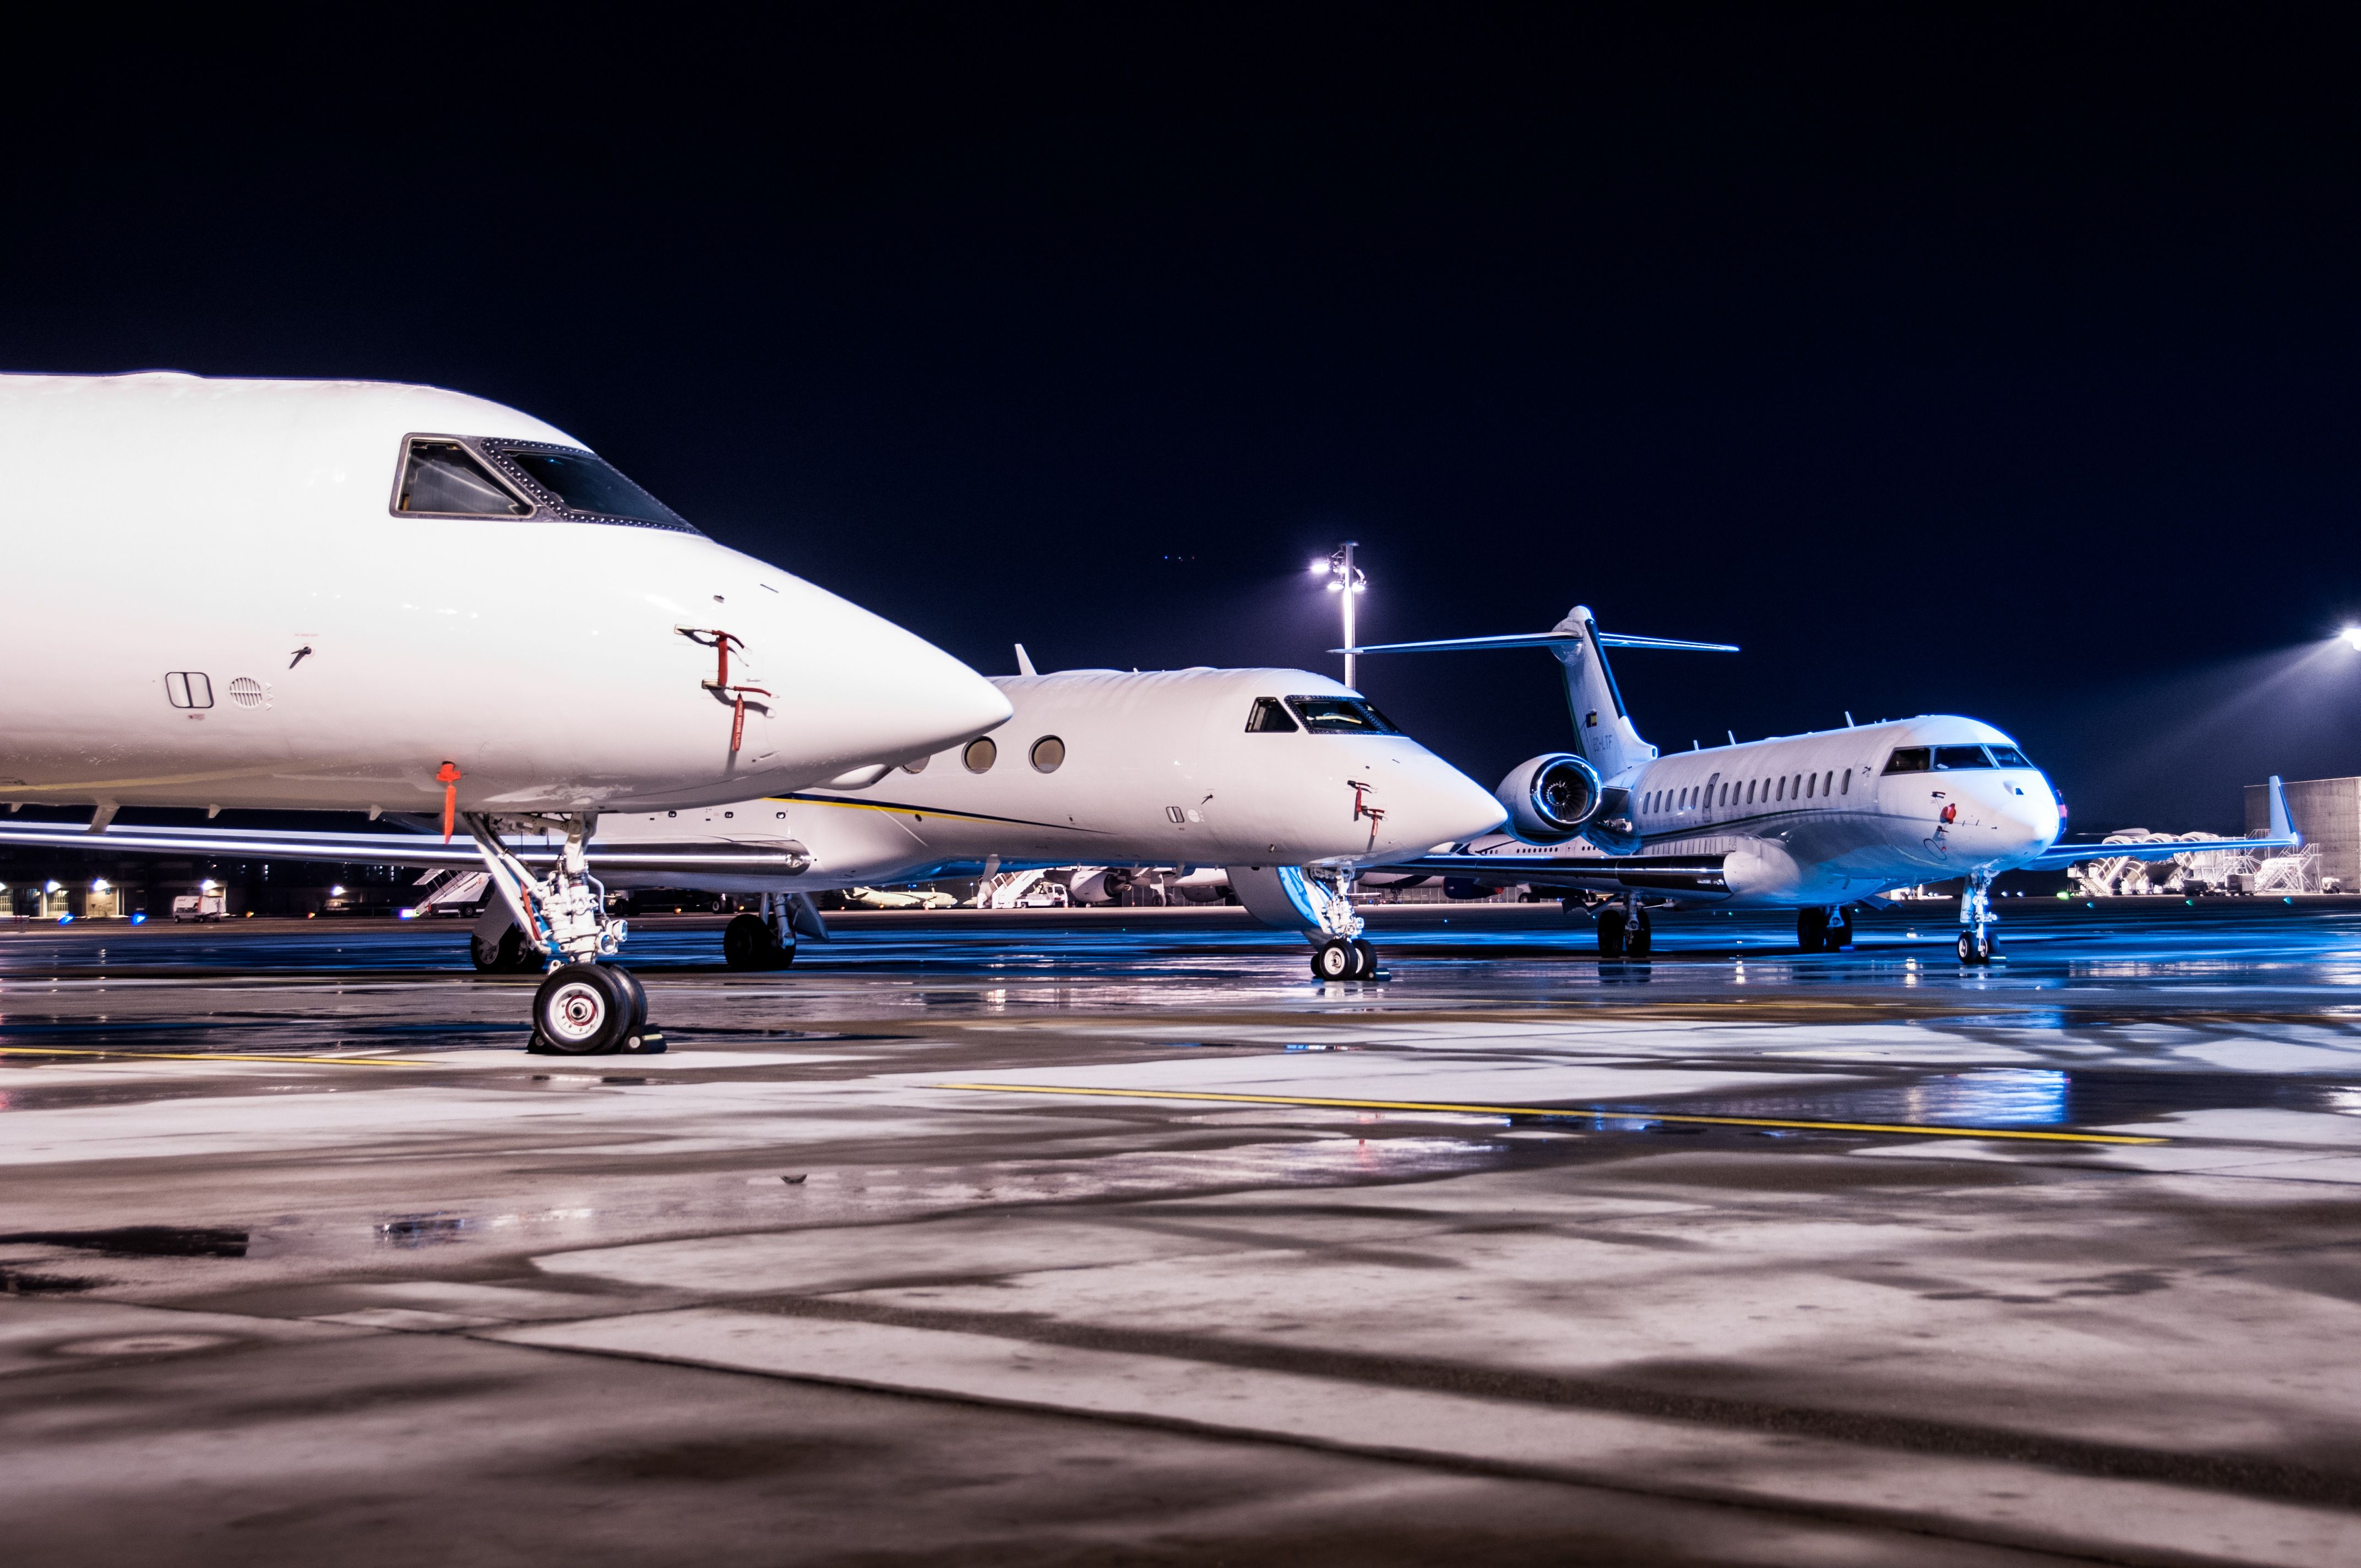 Private jets parked at an airport